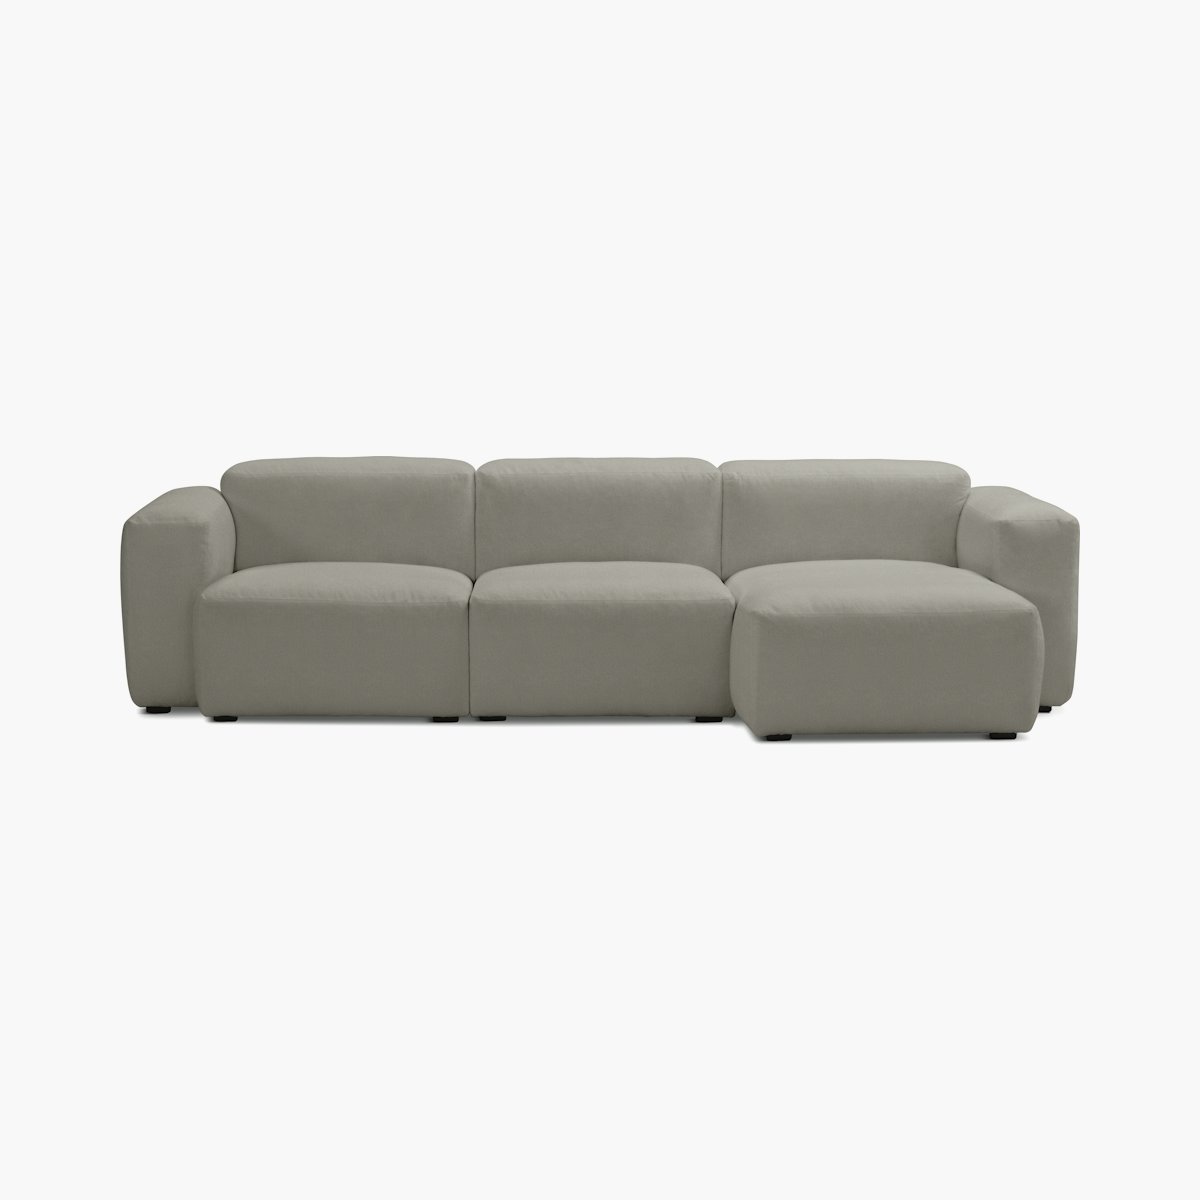 Mags Soft Low Narrow Chaise Sectional